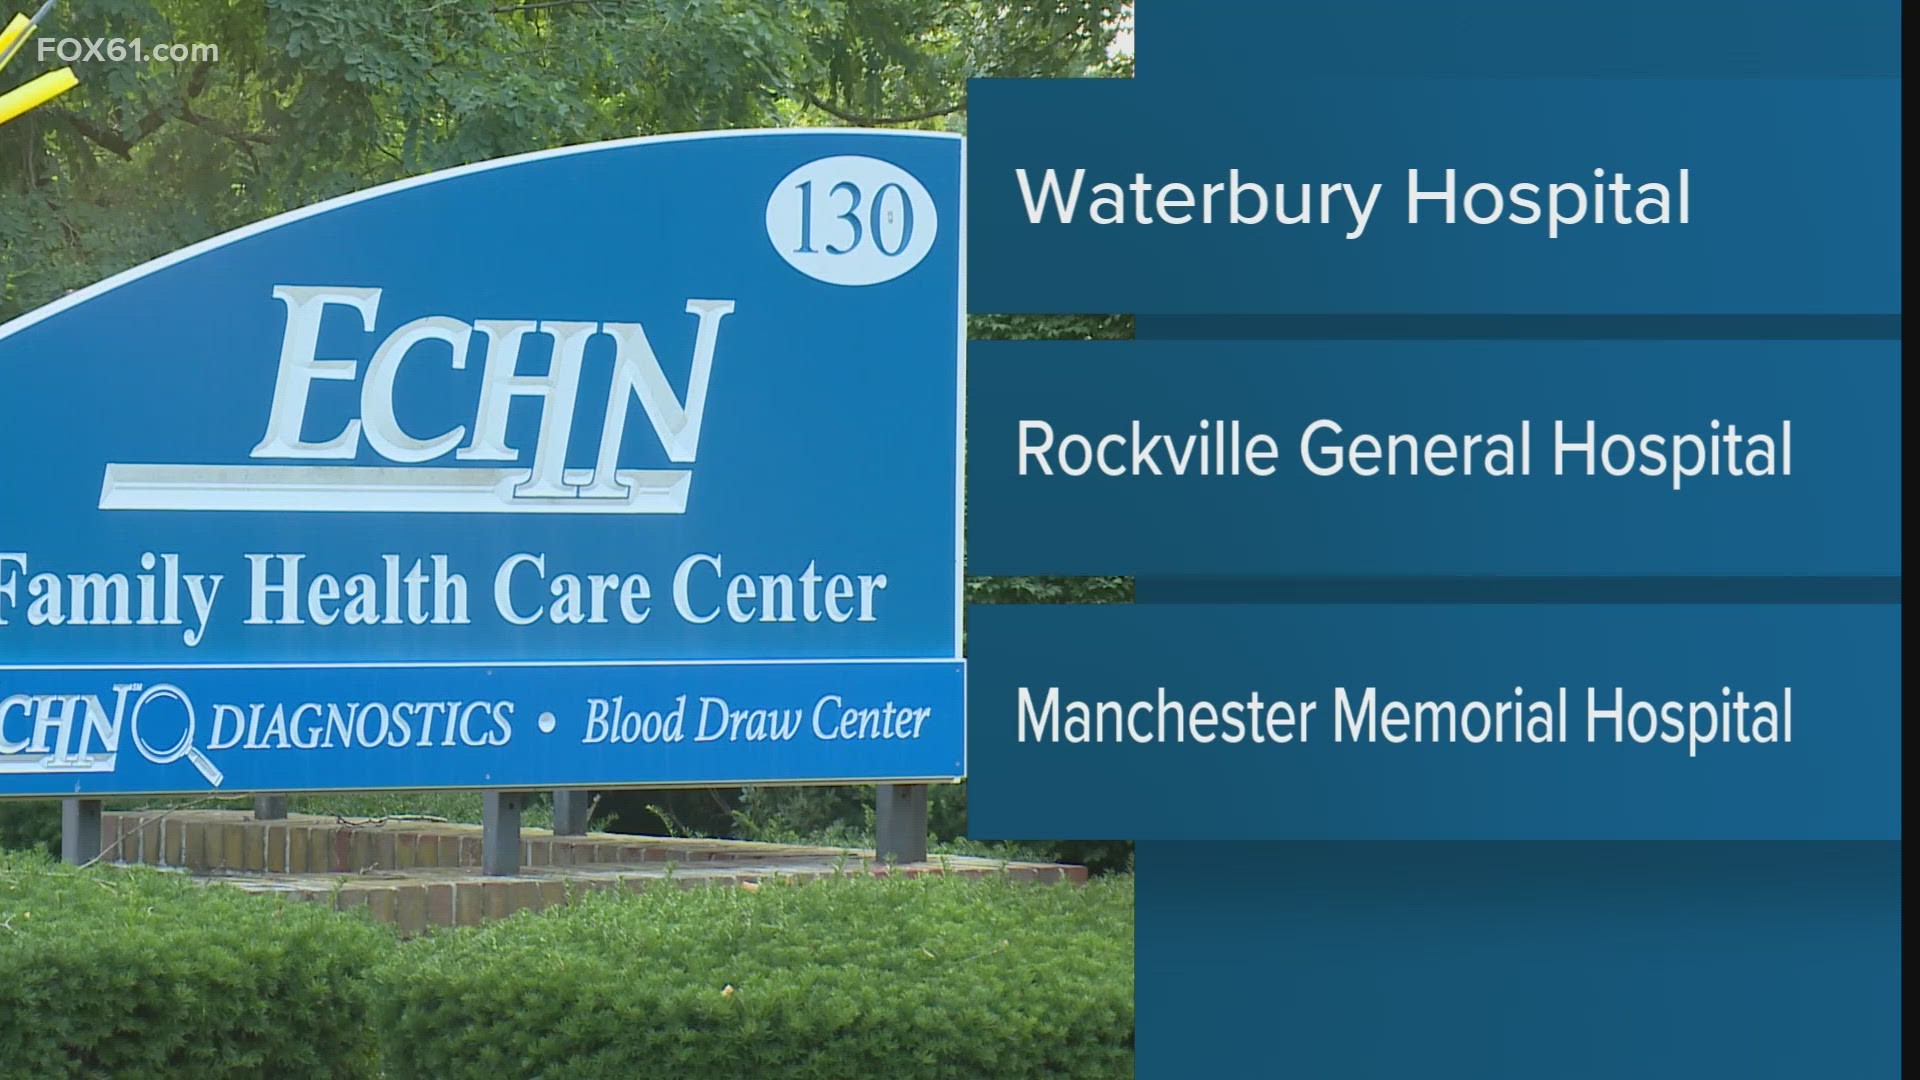 The agreement clears the way for the sale of Manchester Memorial, Rockville General and Waterbury Hospital to the New Haven based healthcare organization.